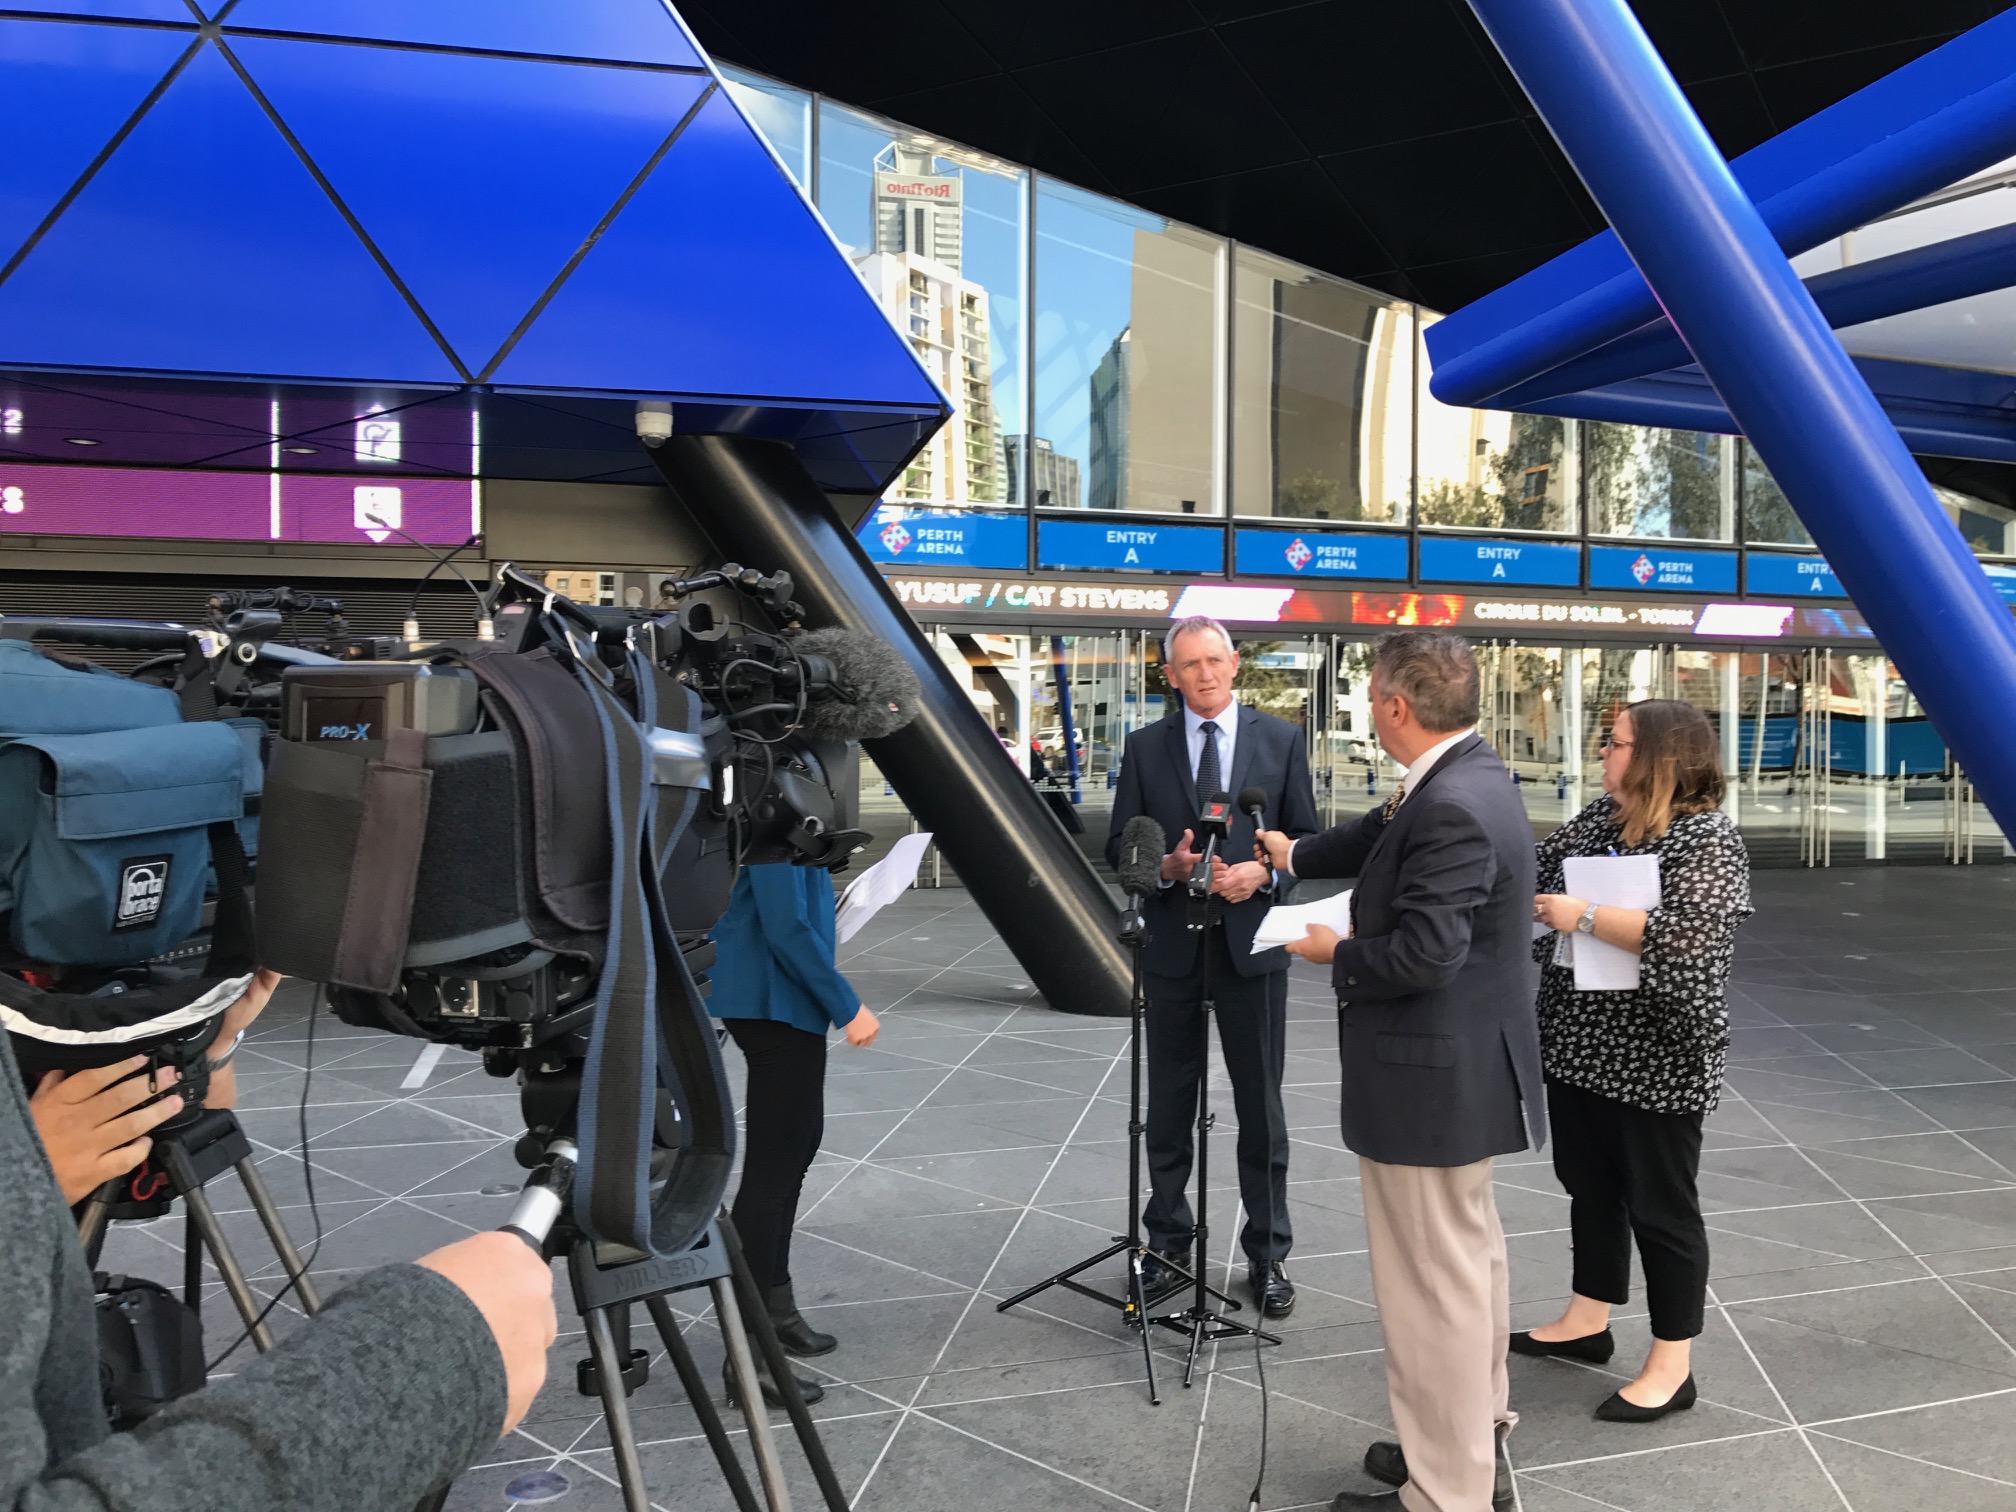 David Hillyard outside Perth arena issuing ticket scalping warning